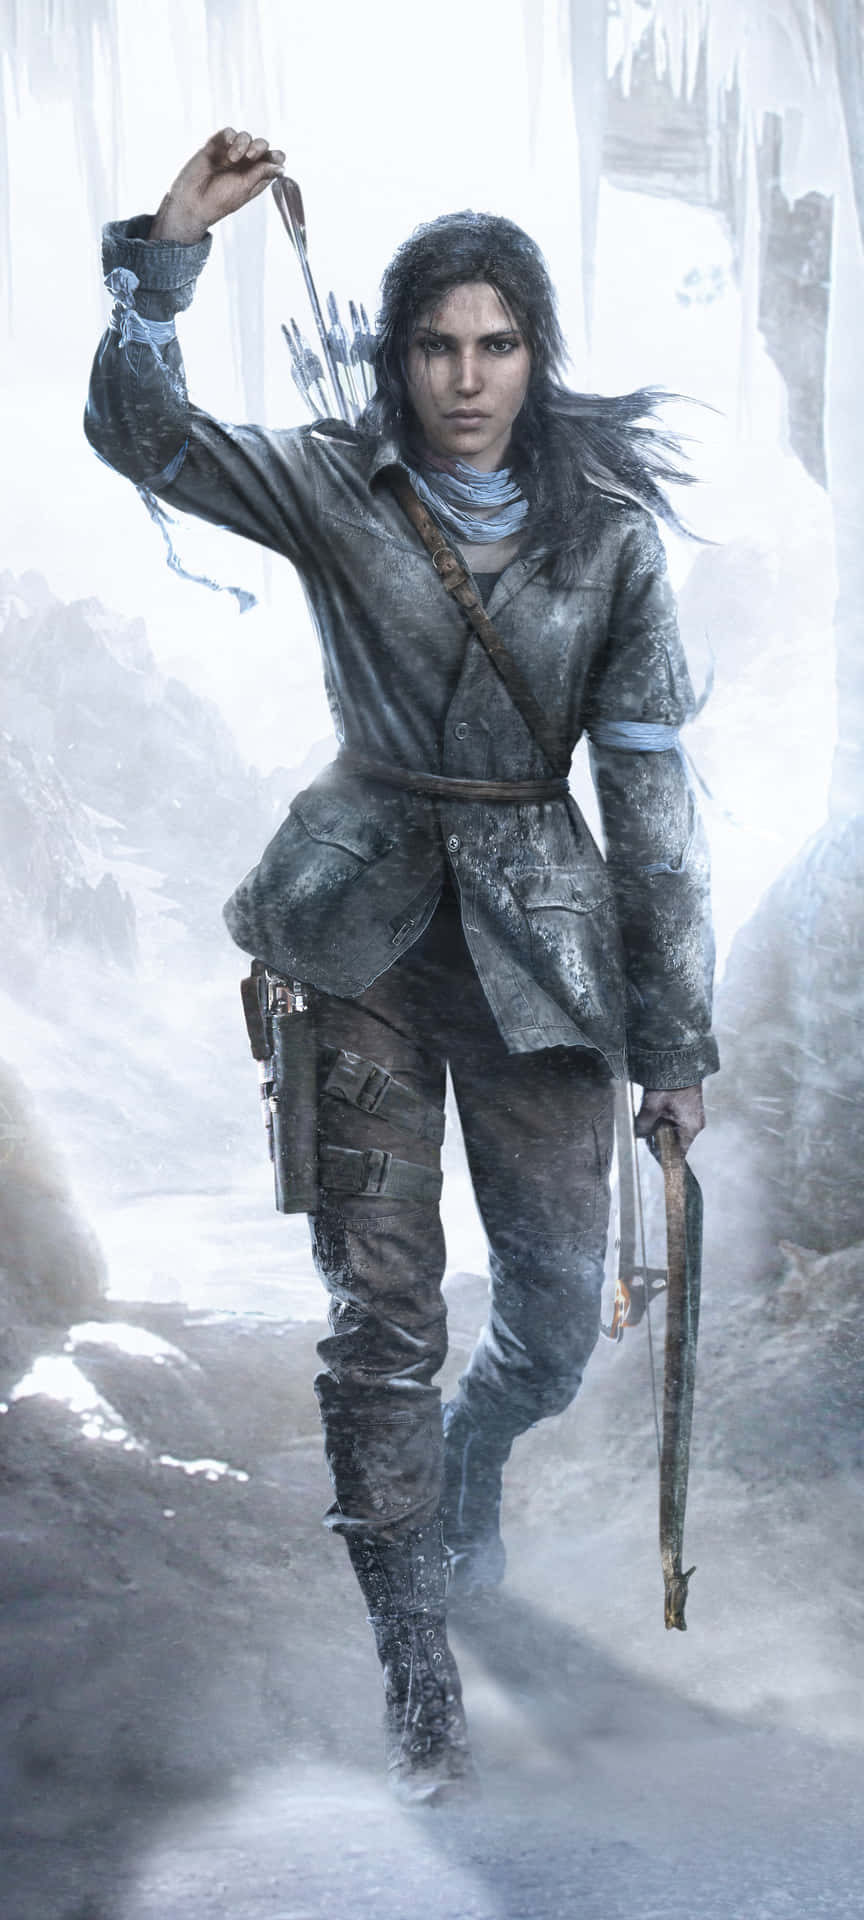 Lara Croft traverses treacherous jungles in search of the purest loot on her iPhone 5s Wallpaper